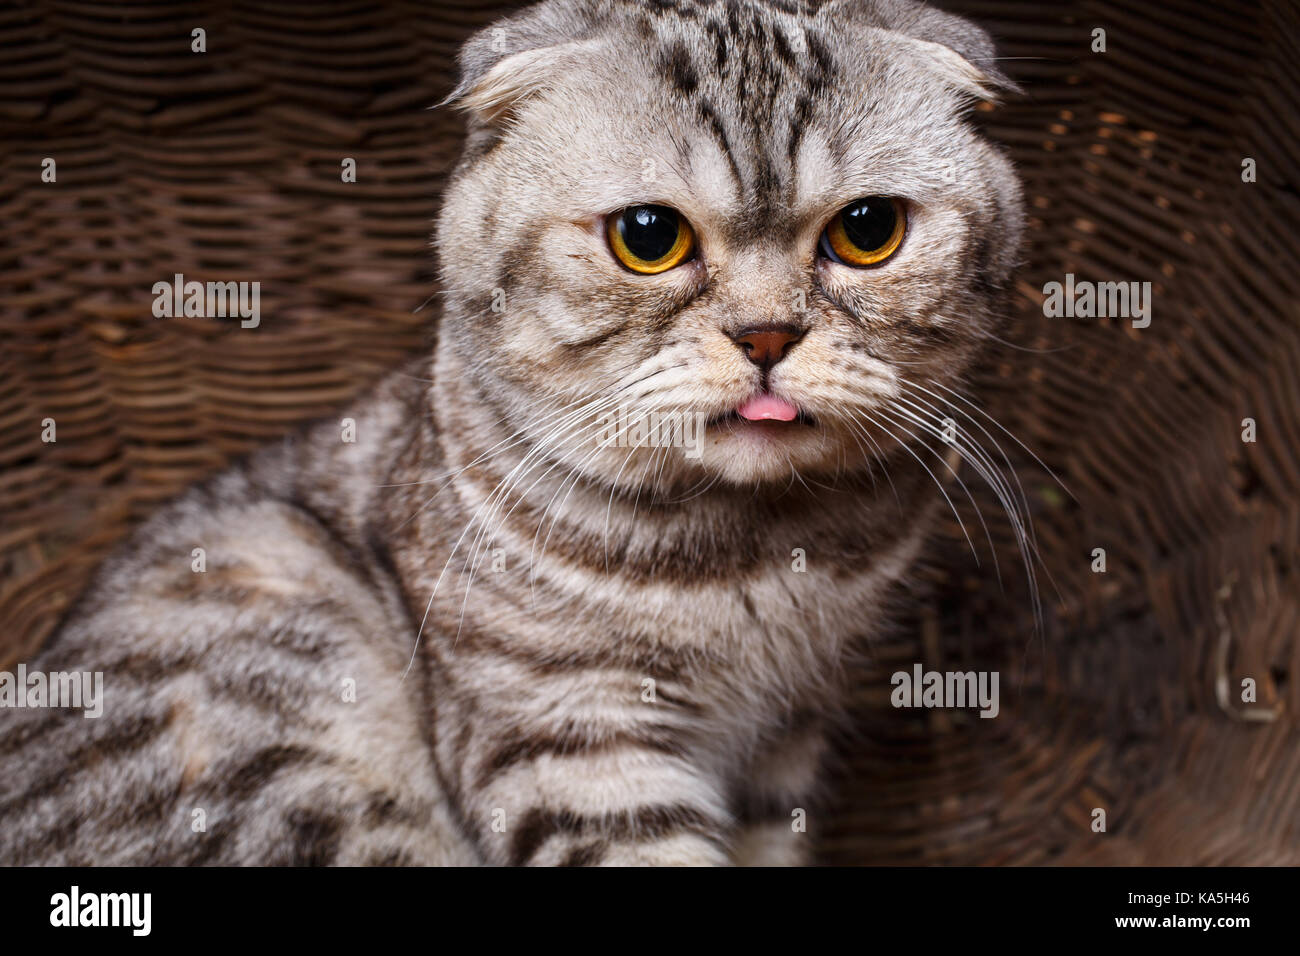 bicolor stripes cat with yellow eyes Scottish Fold Sits in a wooden basket Stock Photo